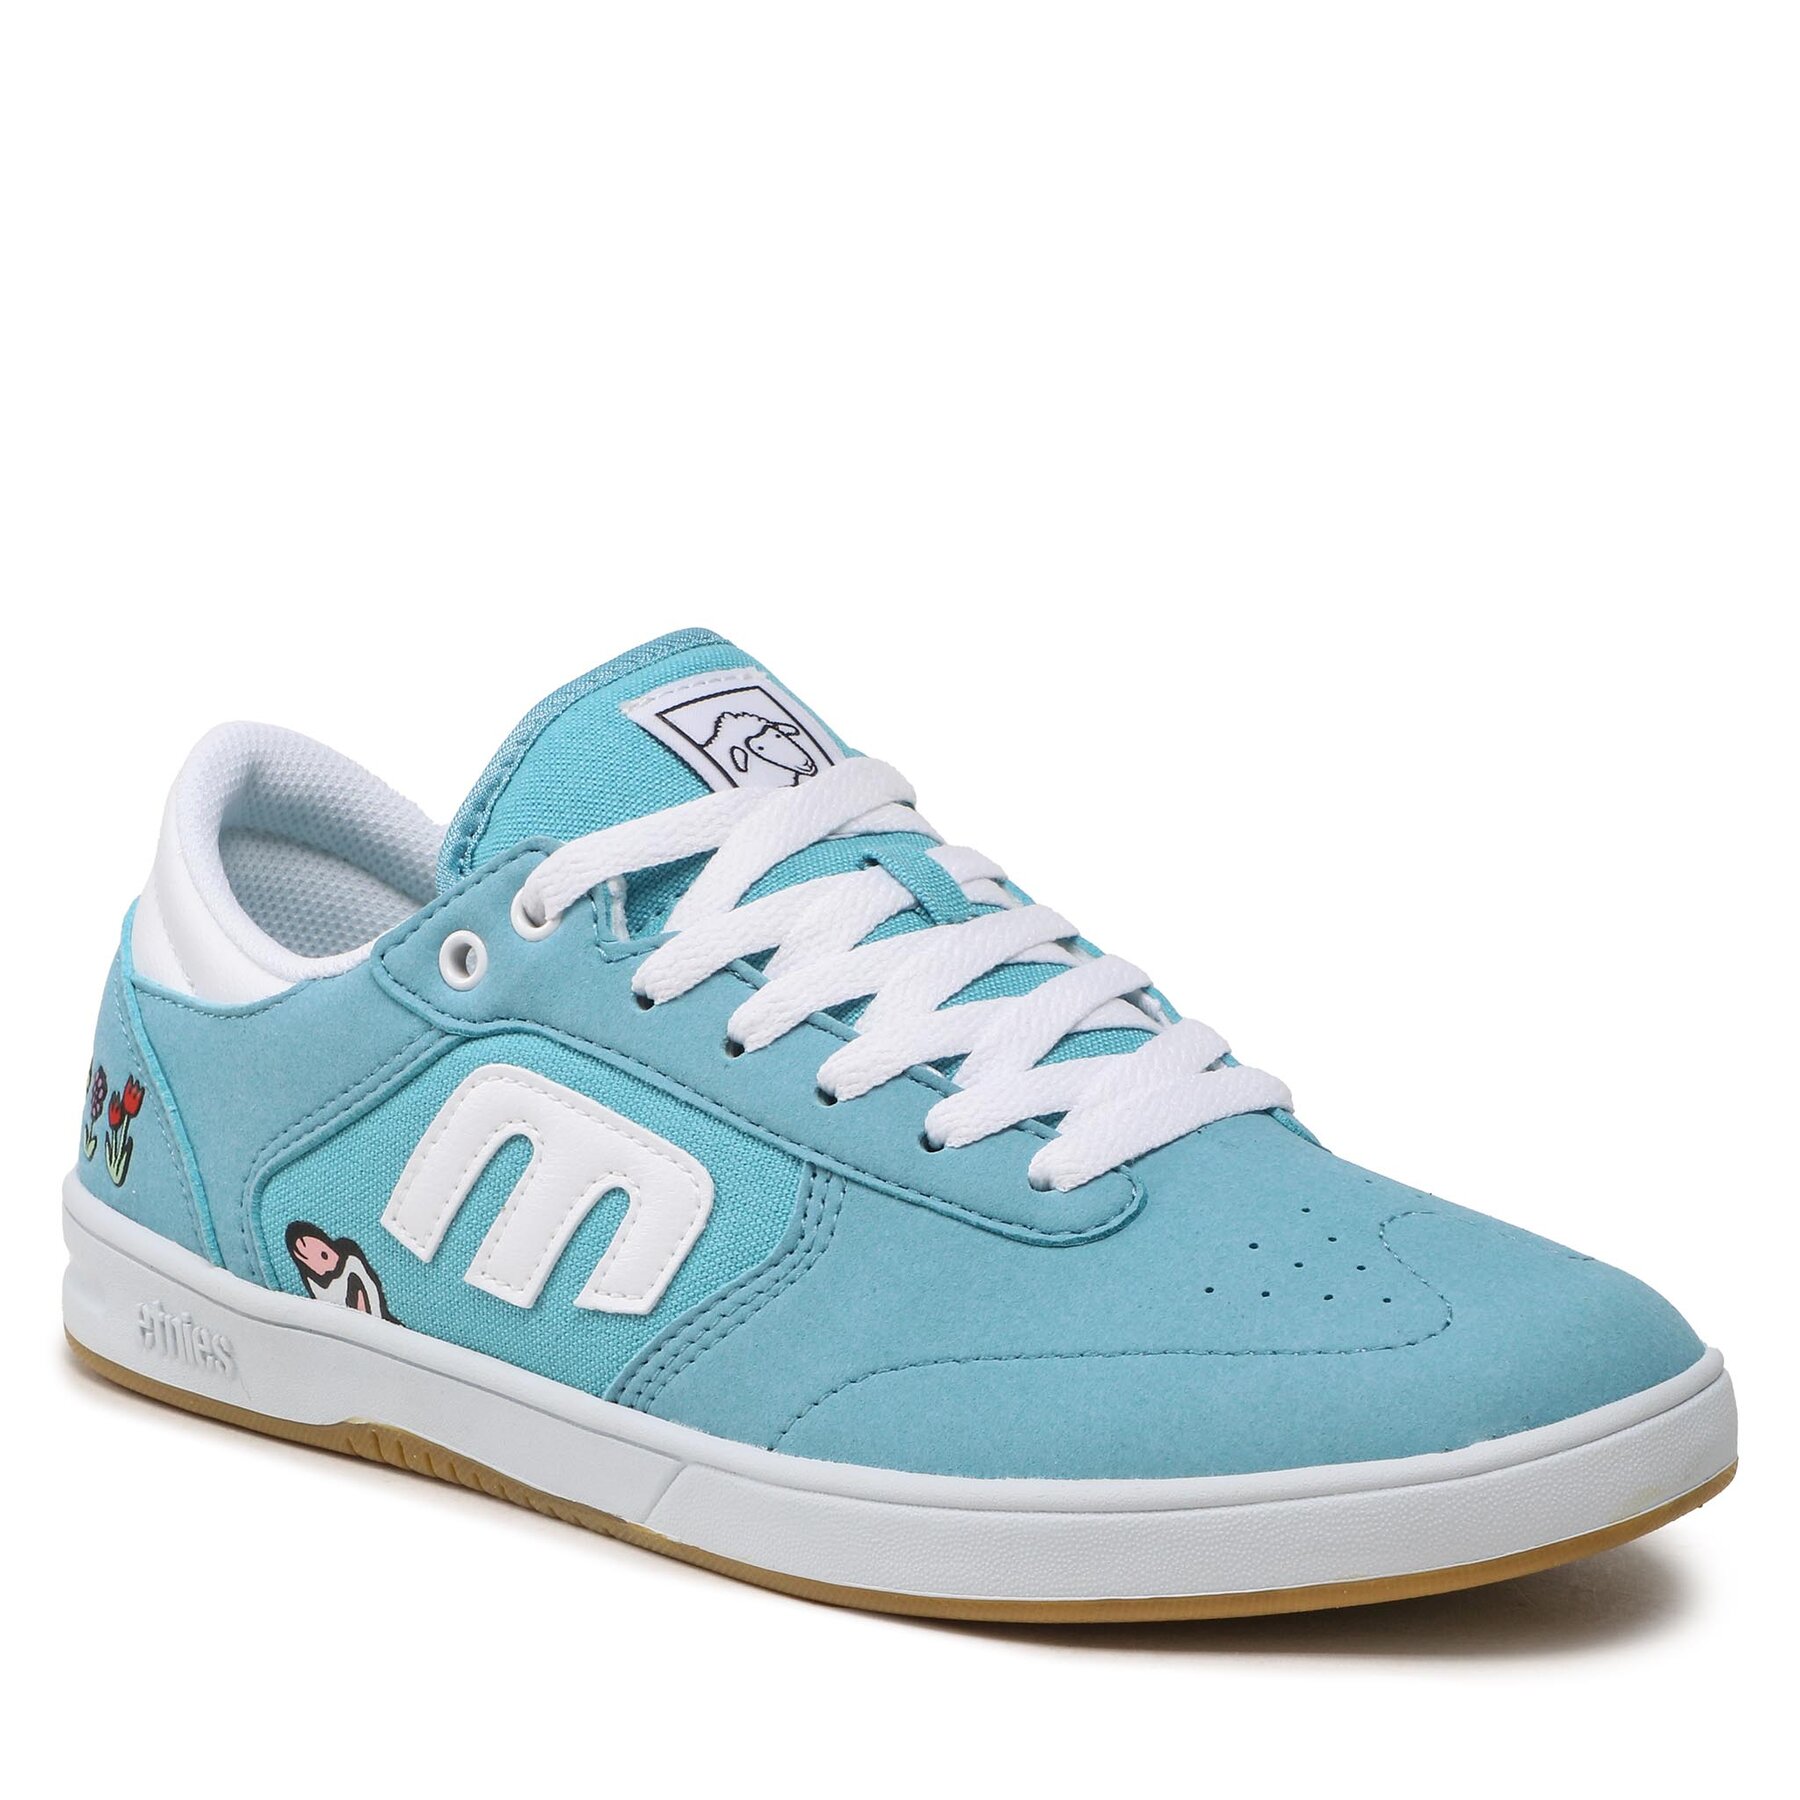 Image de Sneakers Etnies Windrow Worful X Sheep Blue/White 4107000591 442